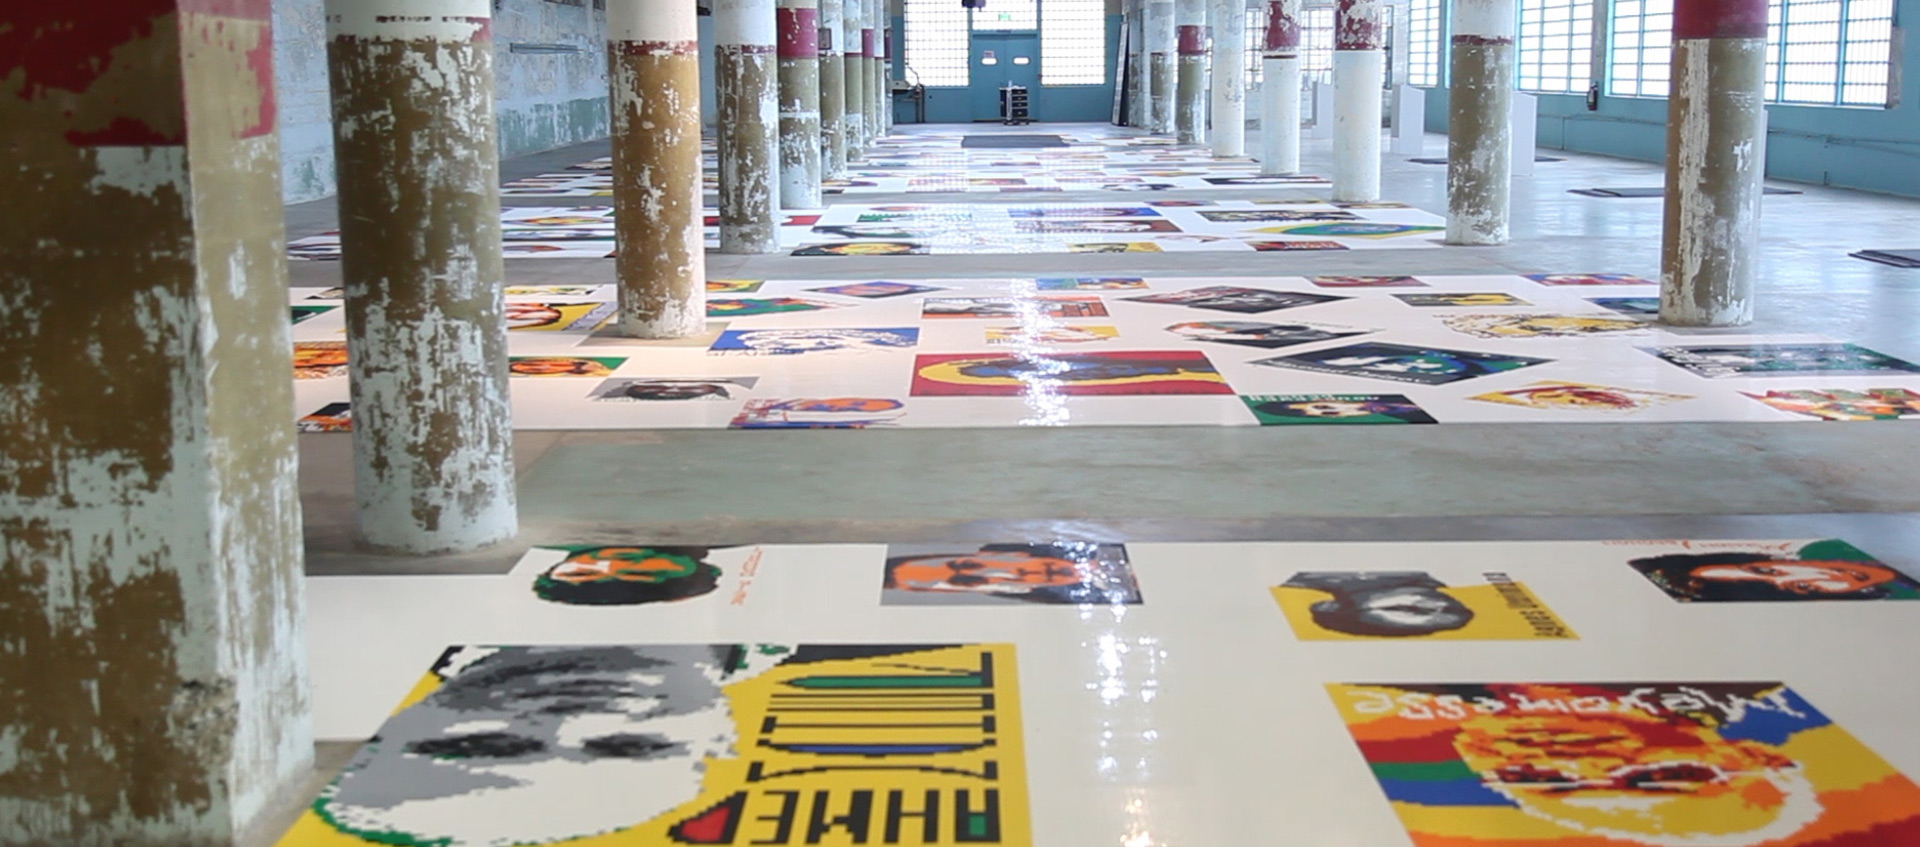 An installation view of Ai Weiwei's Trace, consisting of 190 portraits of dissidents made of Lego bricks arrayed flat on the floor of the former Alcatraz penitentiary